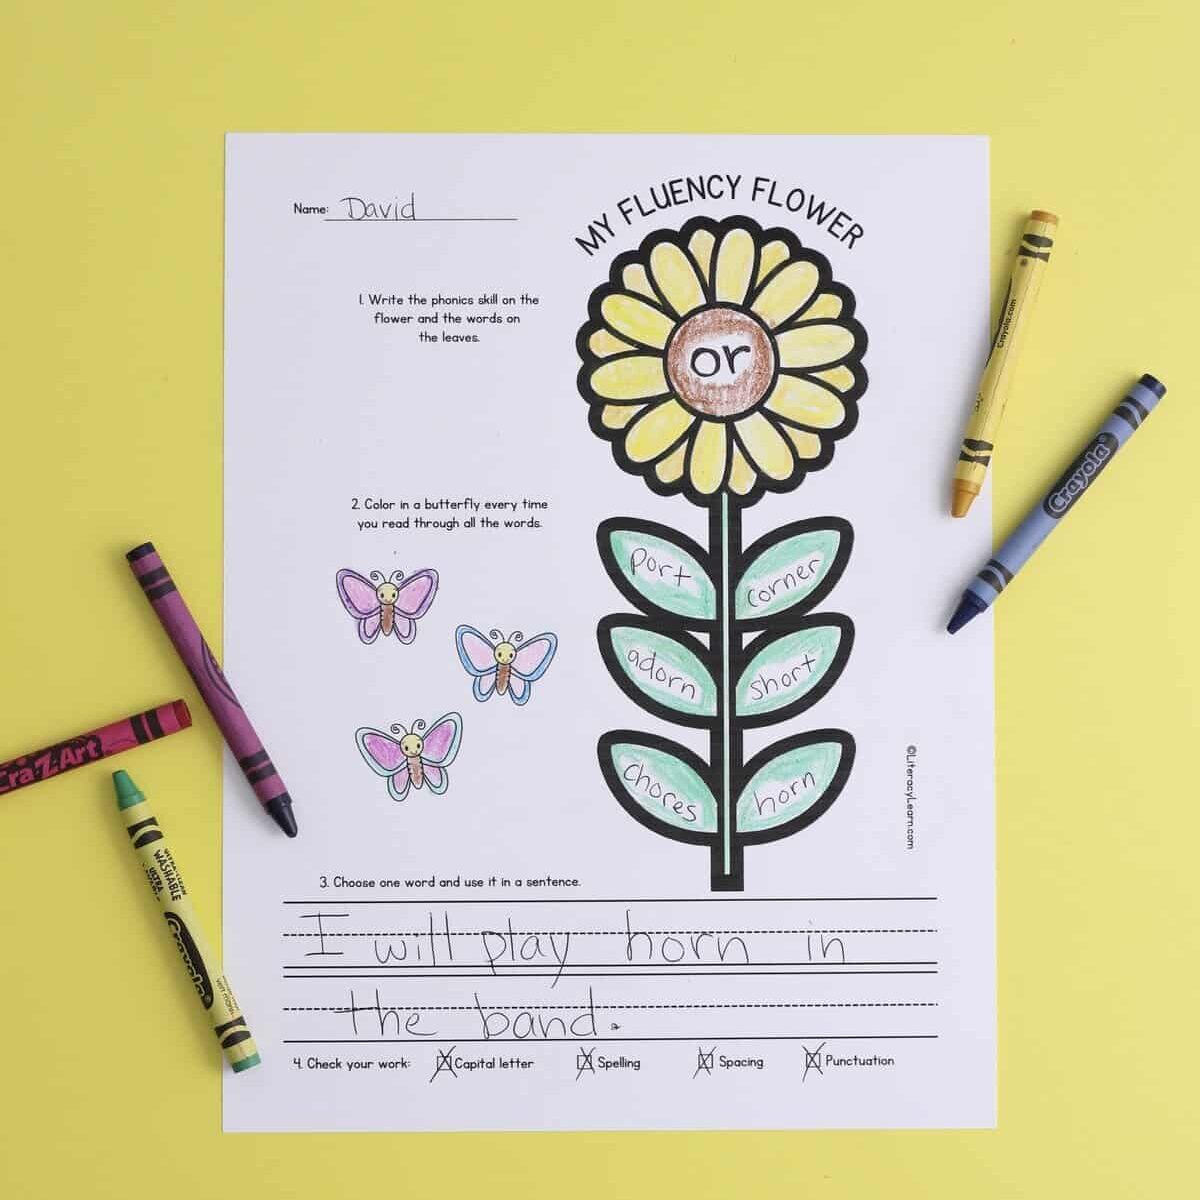 A printed fluency flower worksheet with crayons.